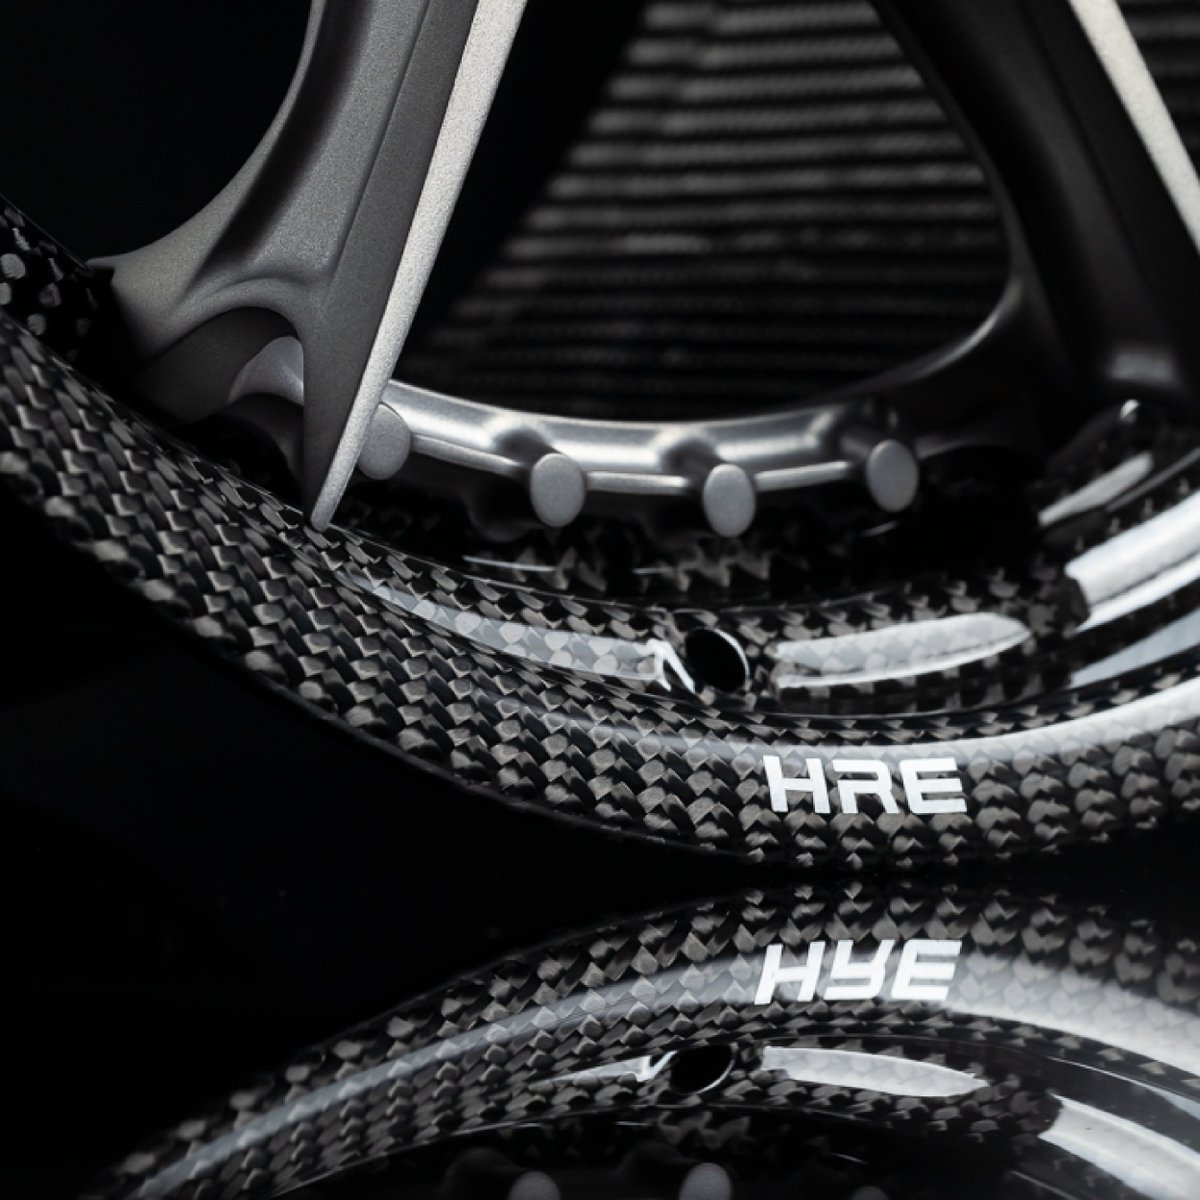 Introducing #CRBN, the first ever proprietary Carbon Fiber barrel by @HRE_Wheels Featuring the all-new Series HX1 · Contact us for more details | ✉️: info@performanceone.ca . . . . . . #HRE #forged #forgedwheels #carbon #carbonfiber #HREWheels #since78 #industrystandard